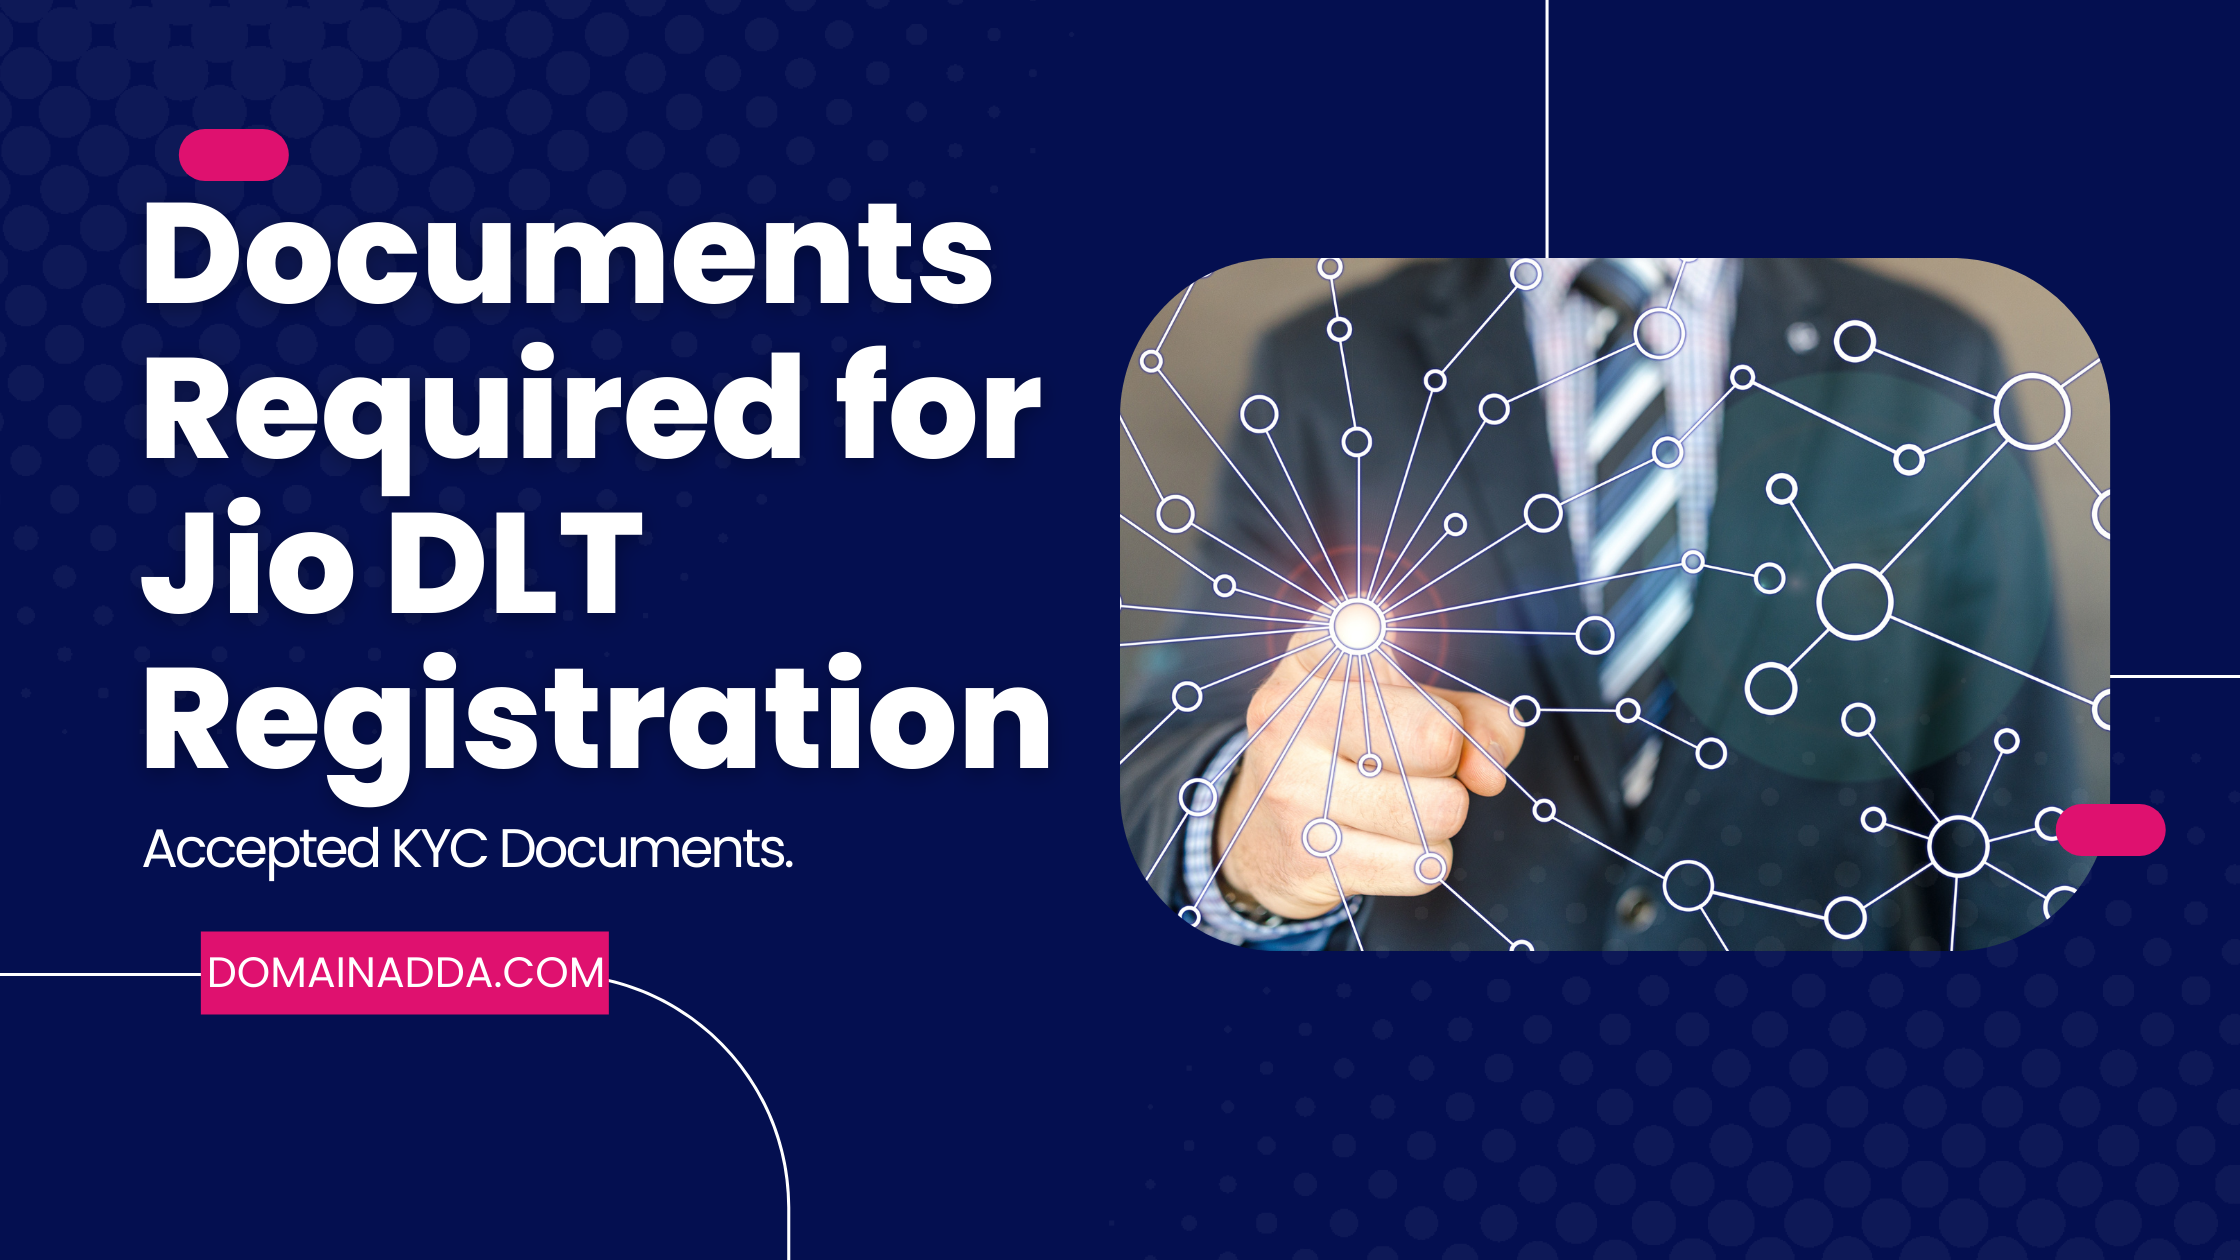 Documents Required for Jio DLT Registration